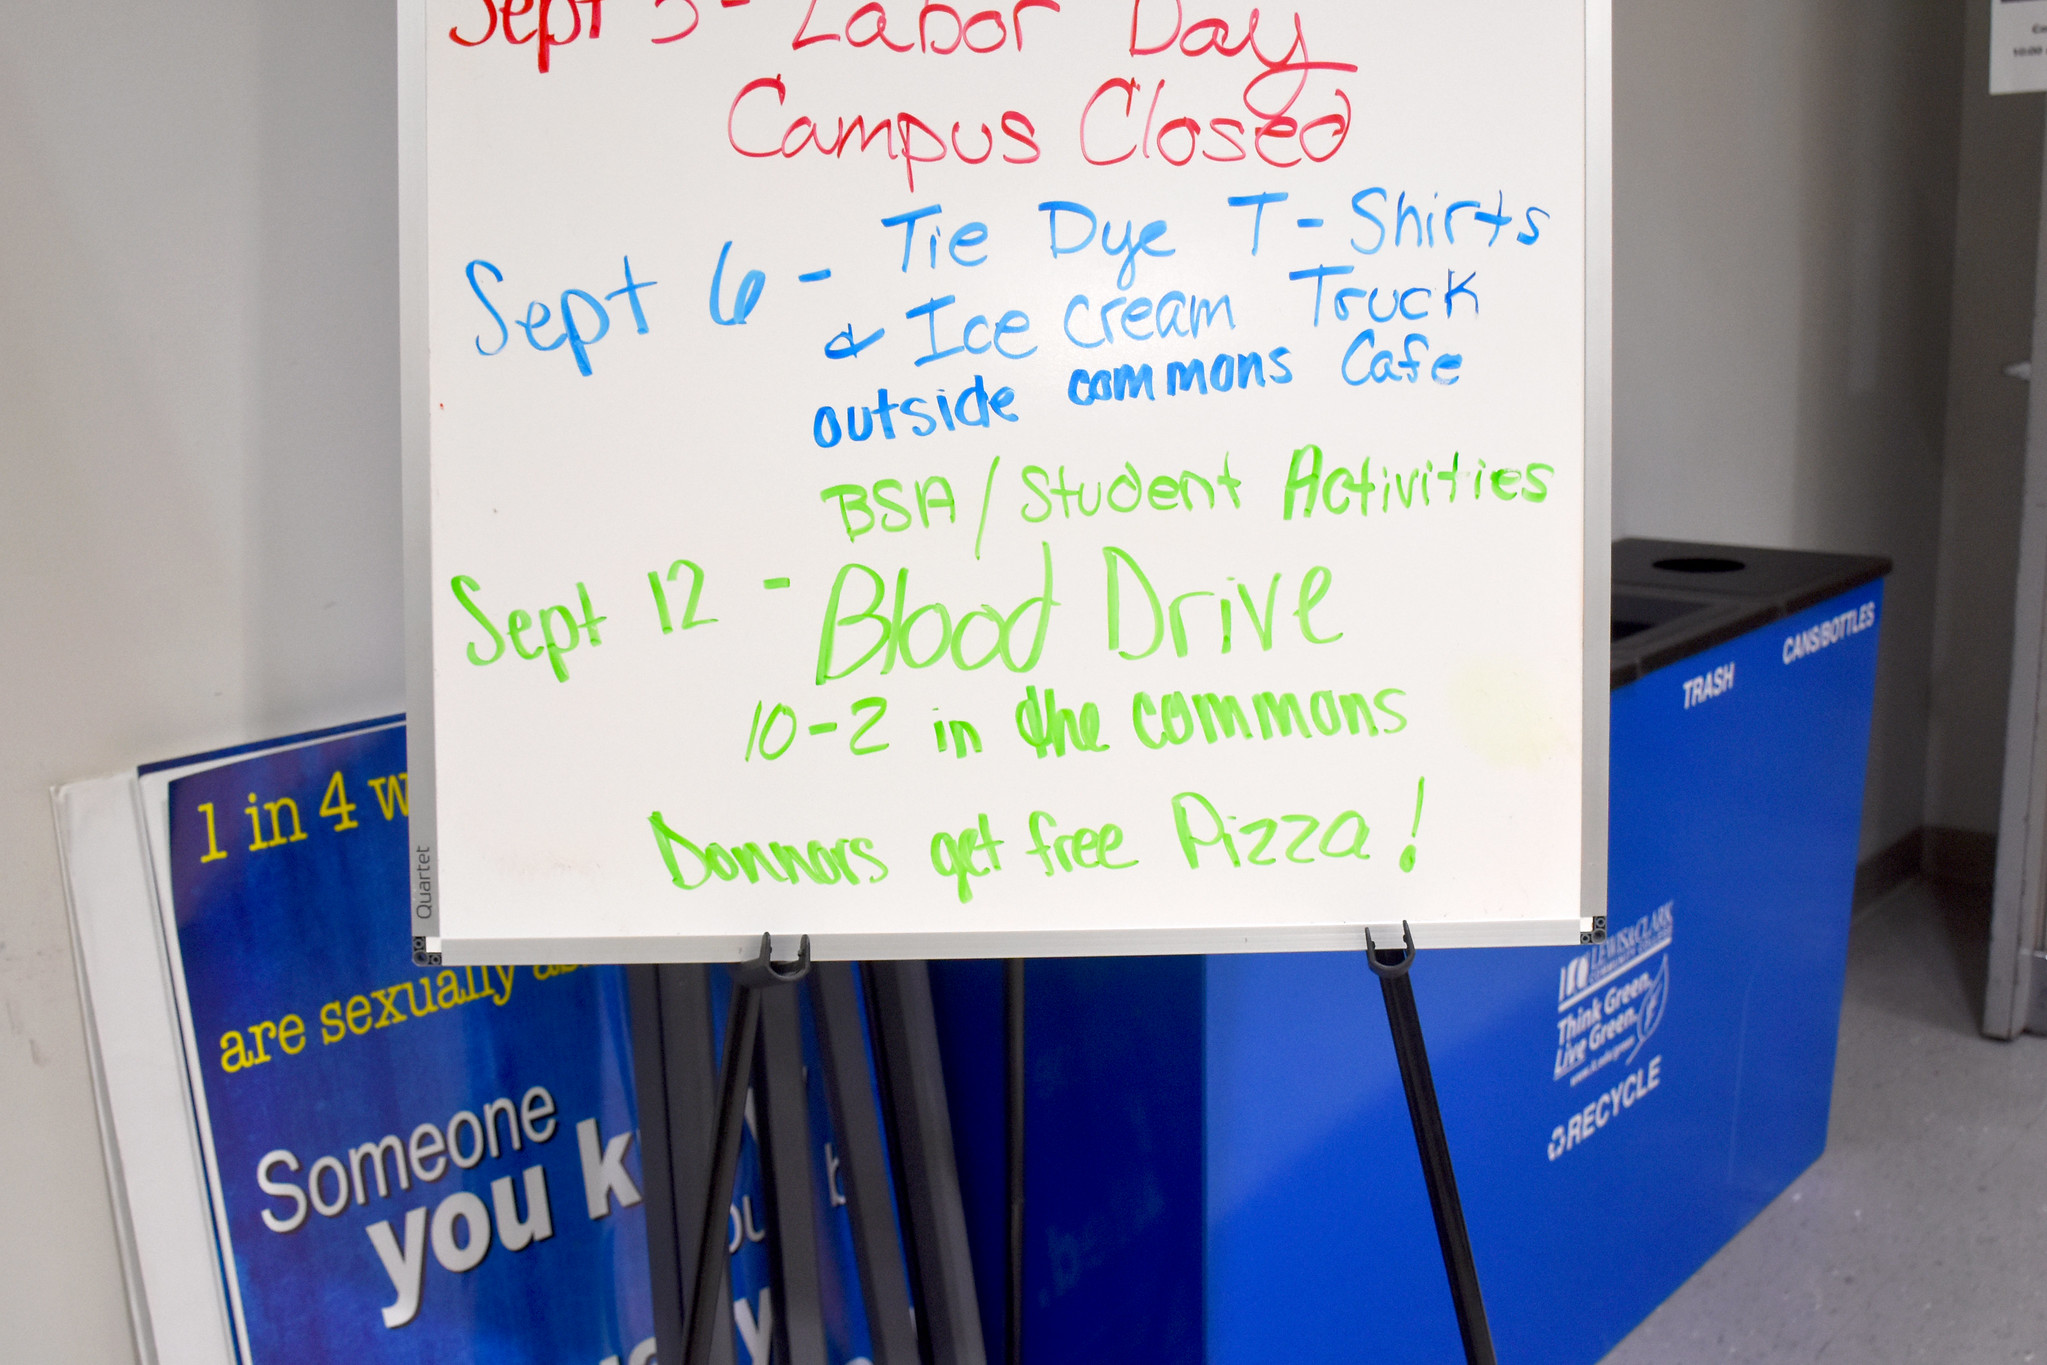 A board lets donors know free pizza is involved